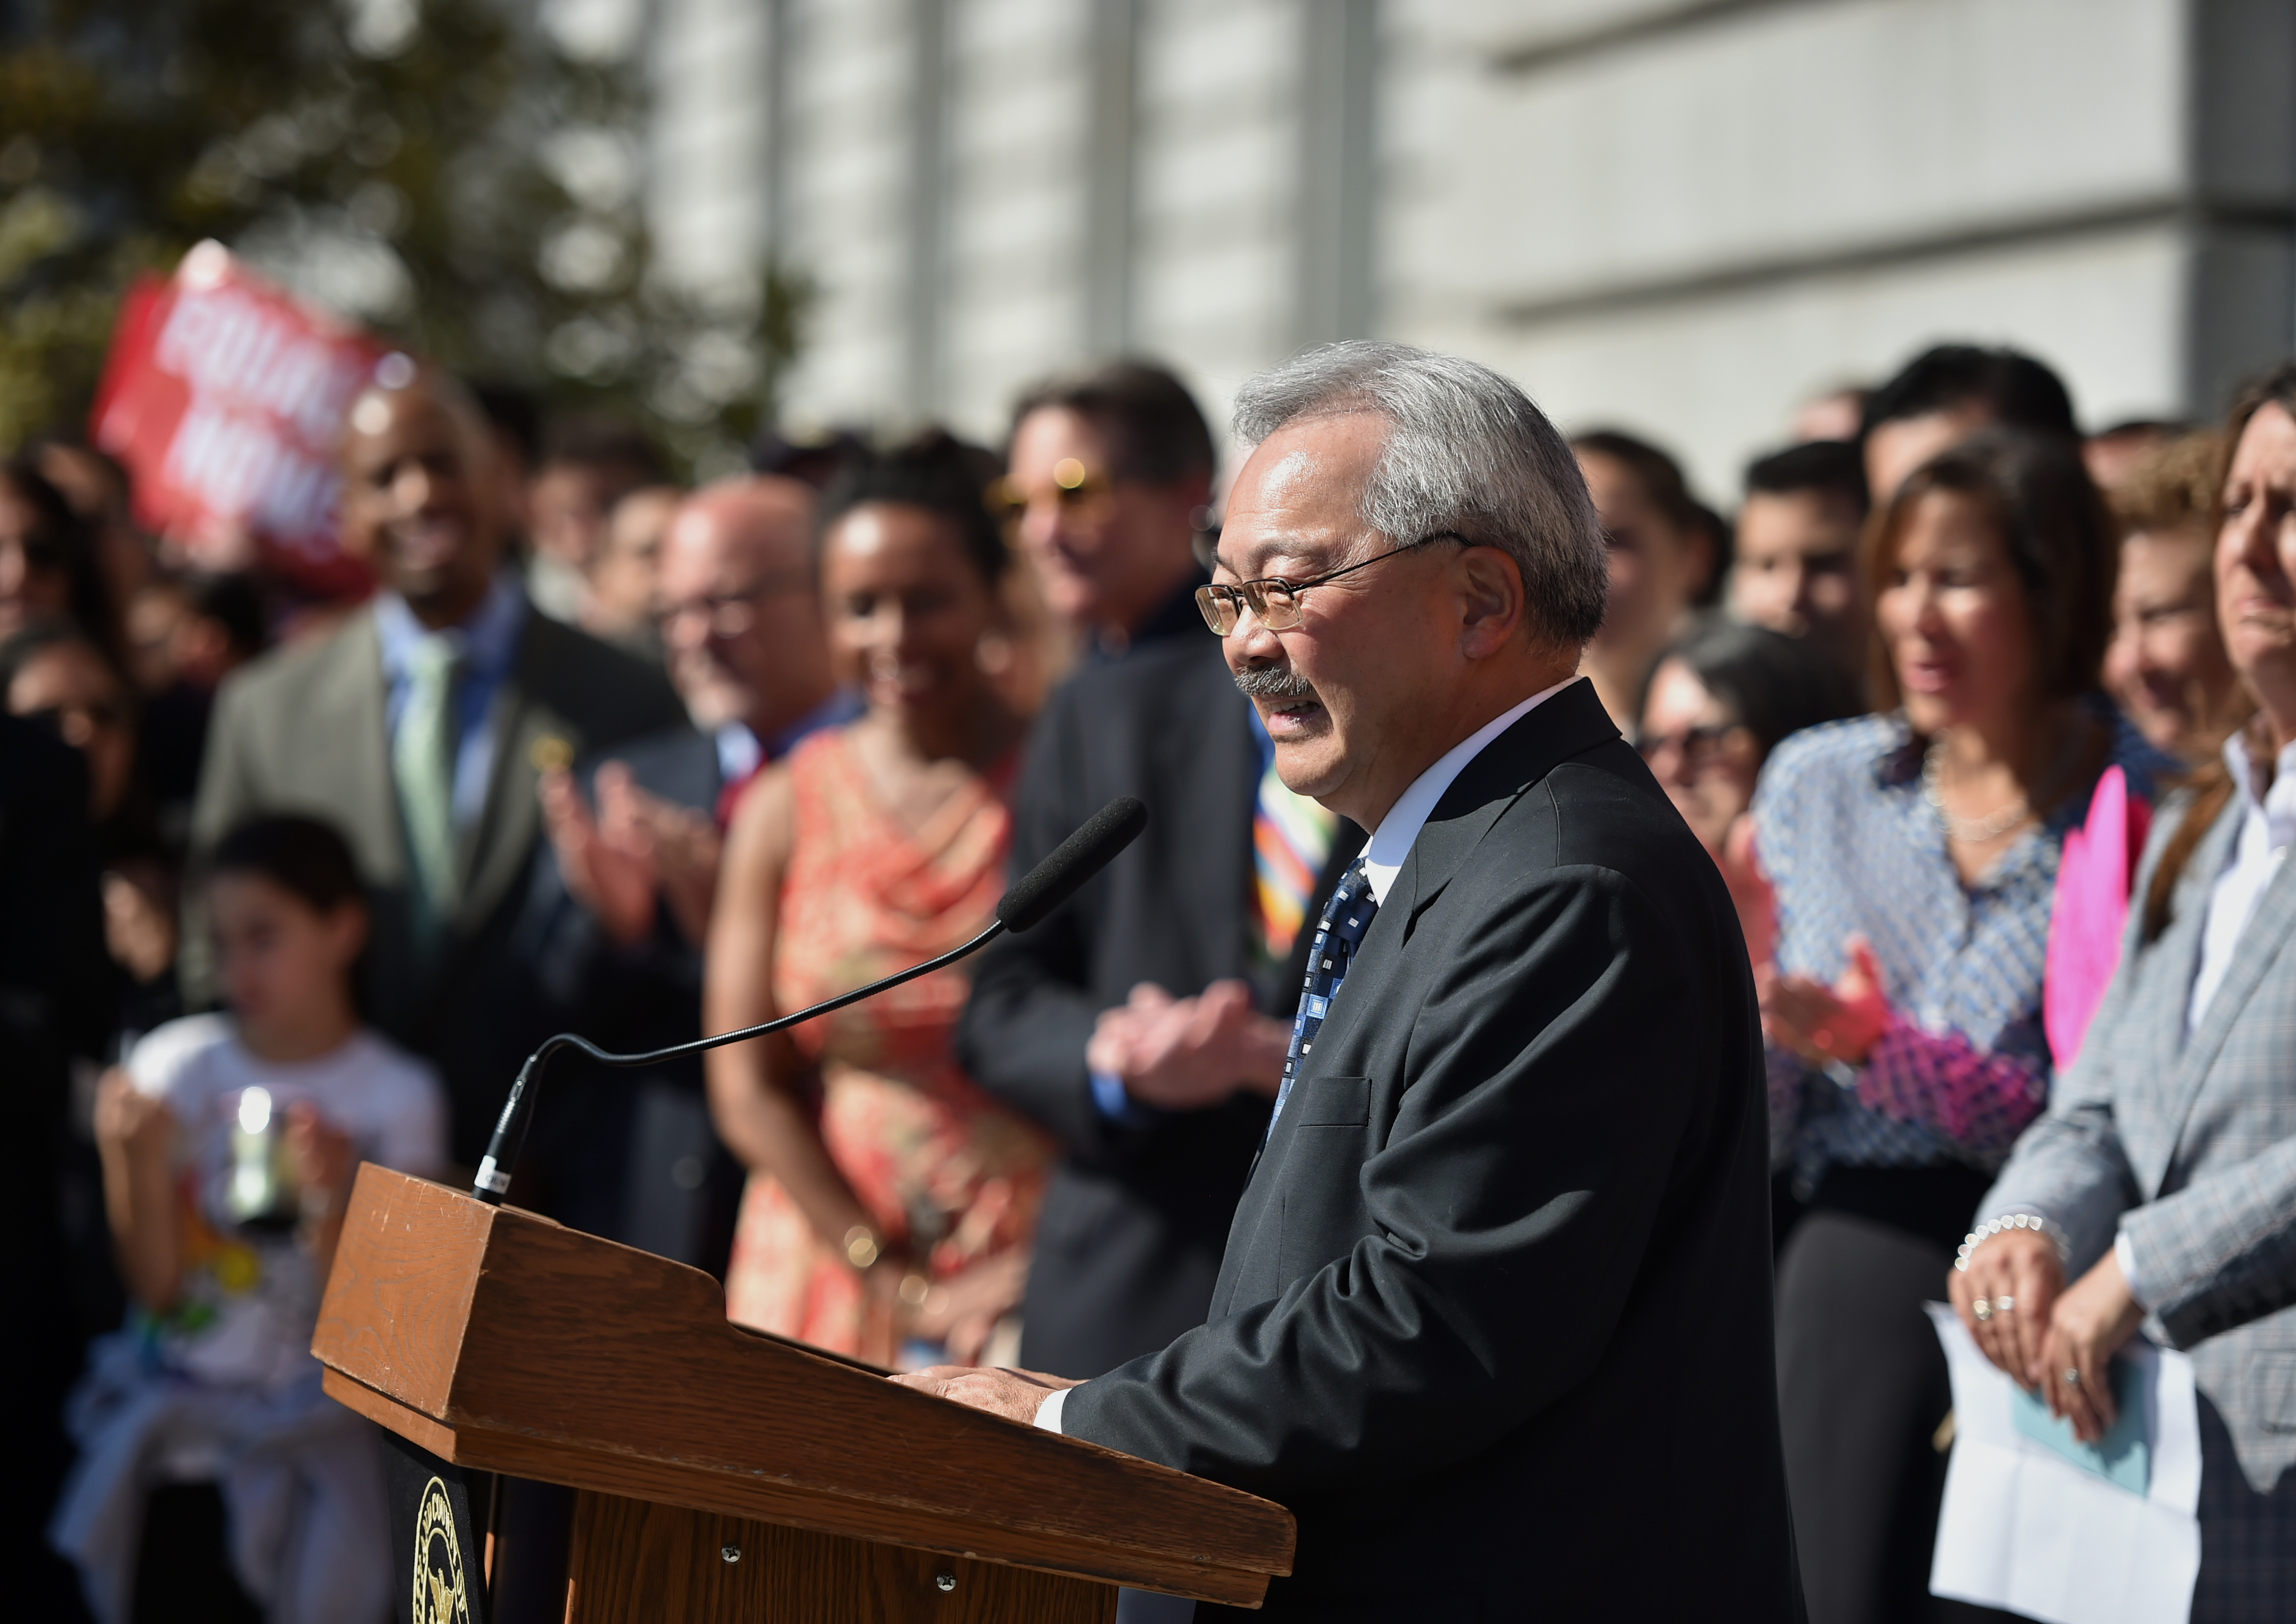 Ed Lee, mayor of San Francisco, speaks during a news conference outside City Hall after the U.S. Supreme Court same-sex marriage ruling in San Francisco, California, U.S., on Friday, June 26, 2015. Same-sex couples have a constitutional right to marry nationwide, the U.S. Supreme Court said in a historic ruling that caps the biggest civil rights transformation in a half-century. Photographer: Josh Edelson/Bloomberg via Getty Images (Bloomberg&mdash;Bloomberg via Getty Images)